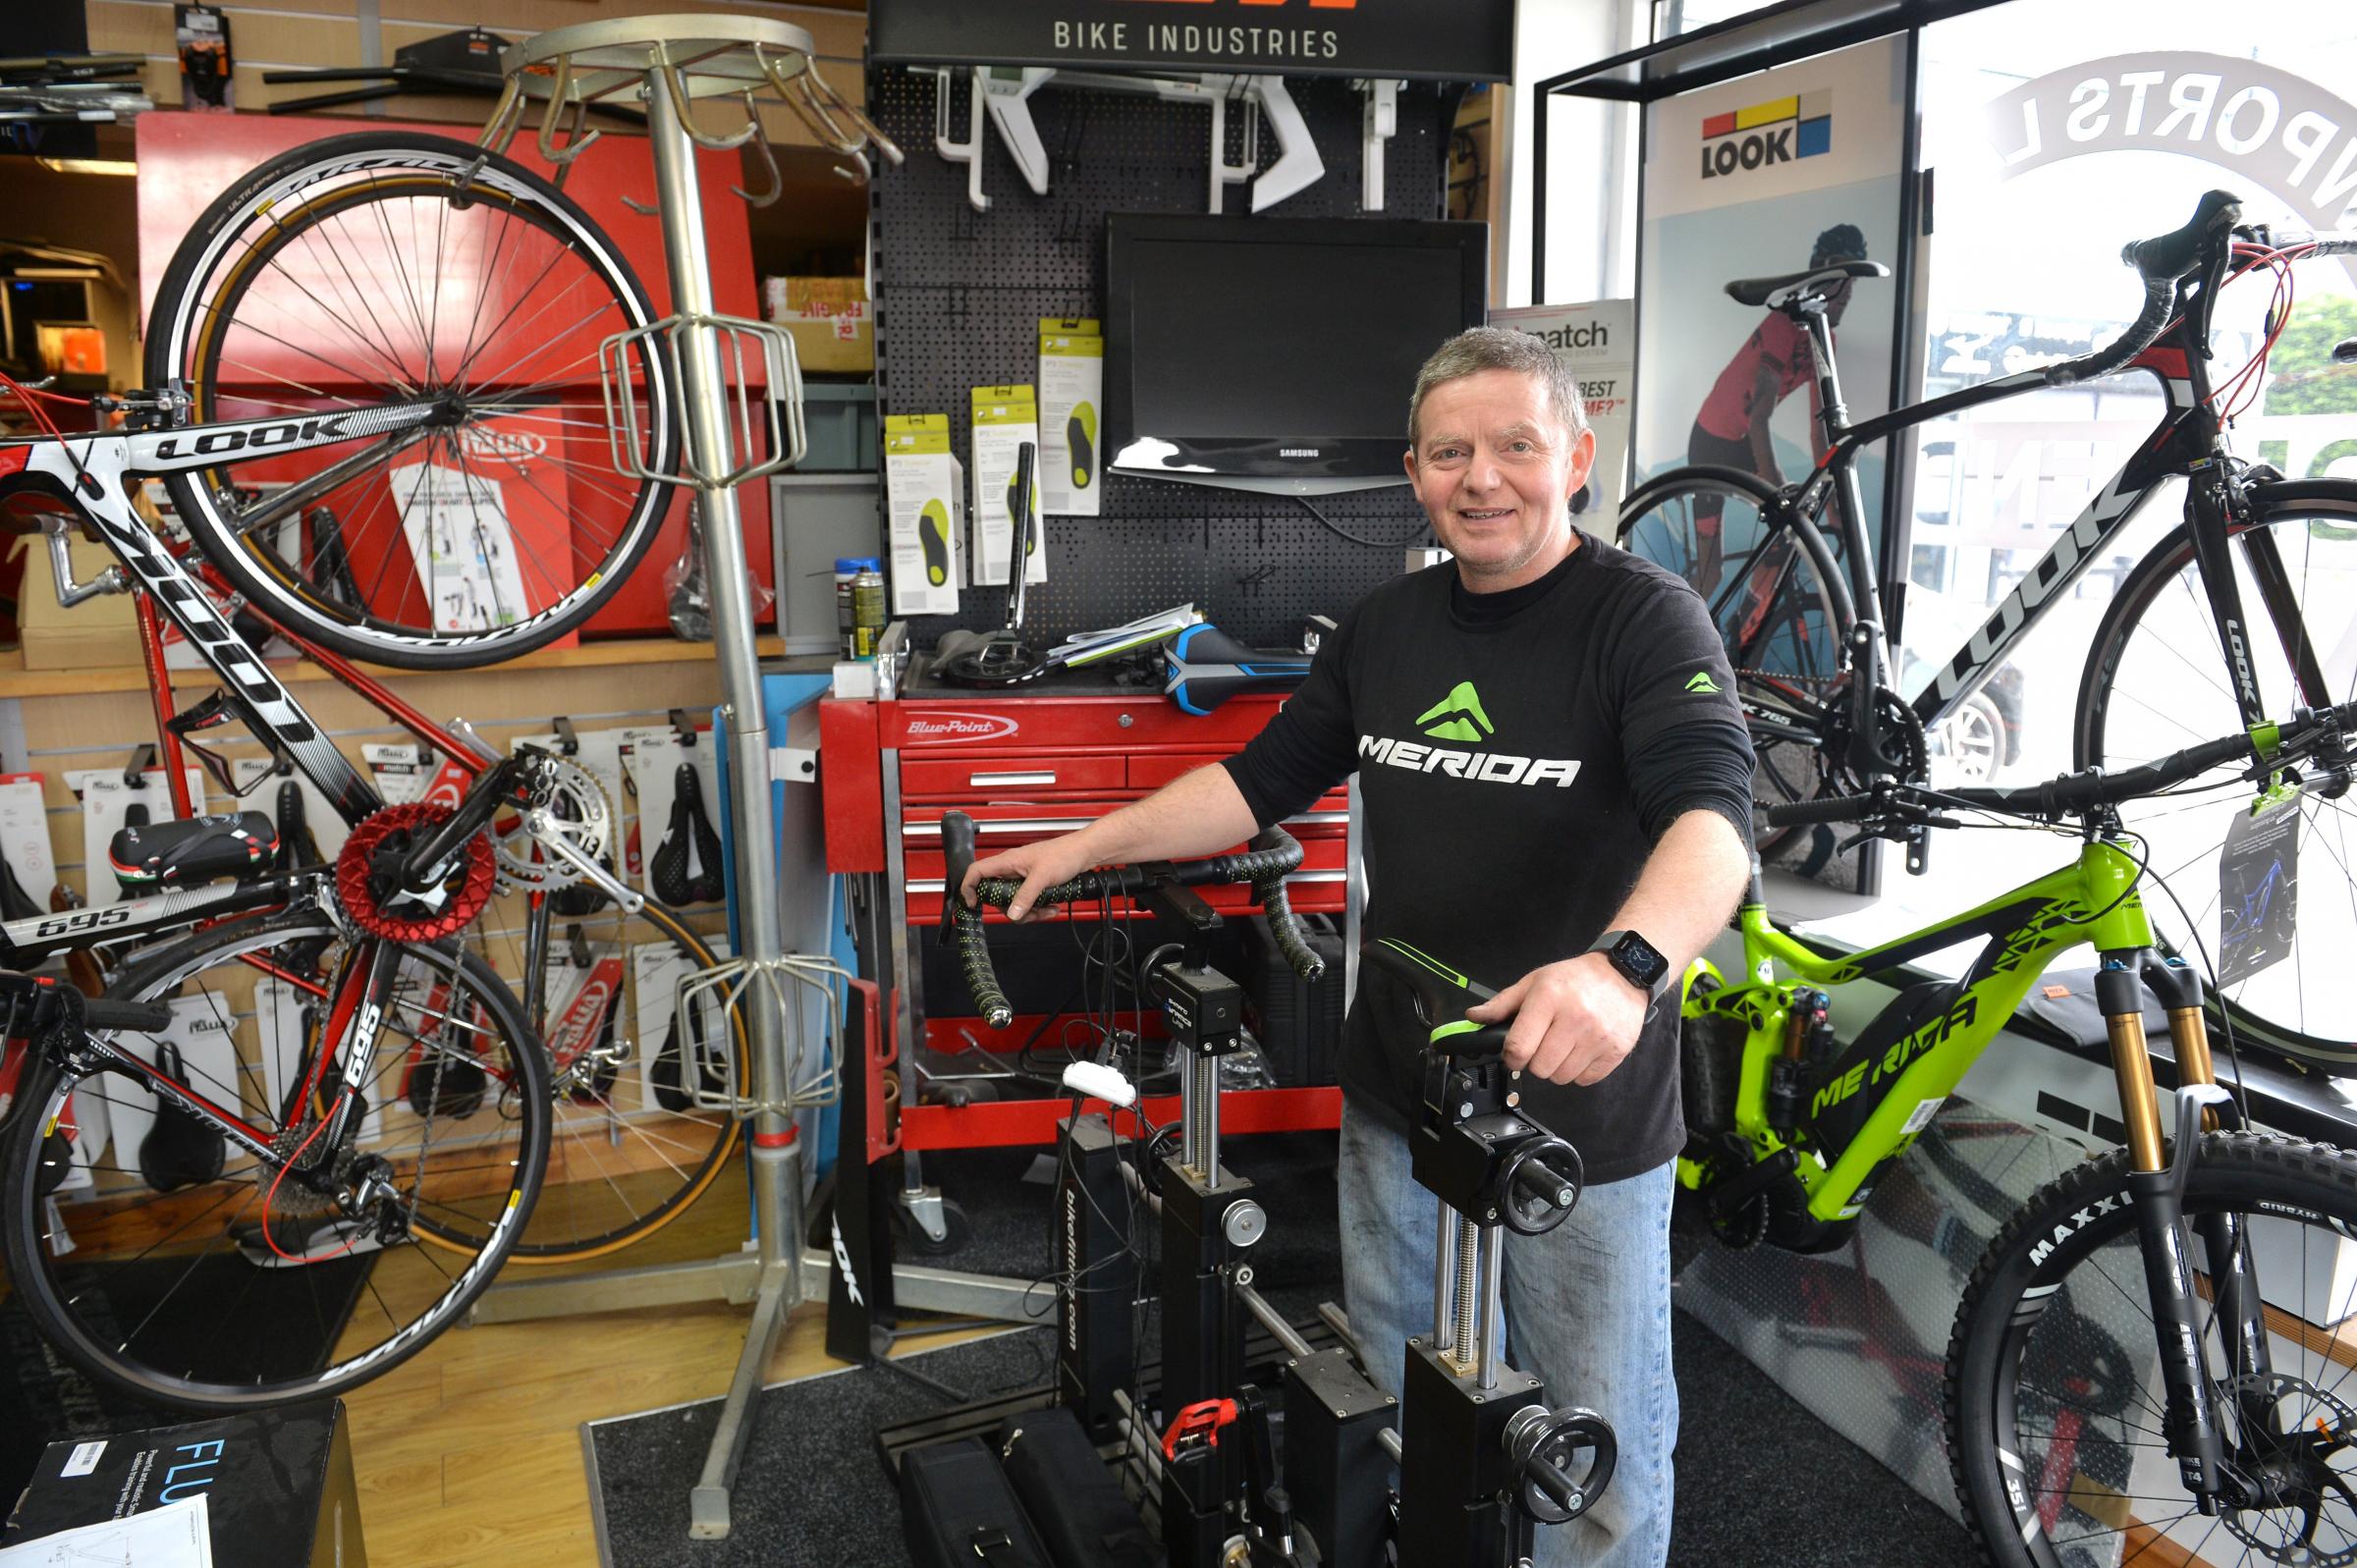 SHOP LOCAL: The city cycling shop 